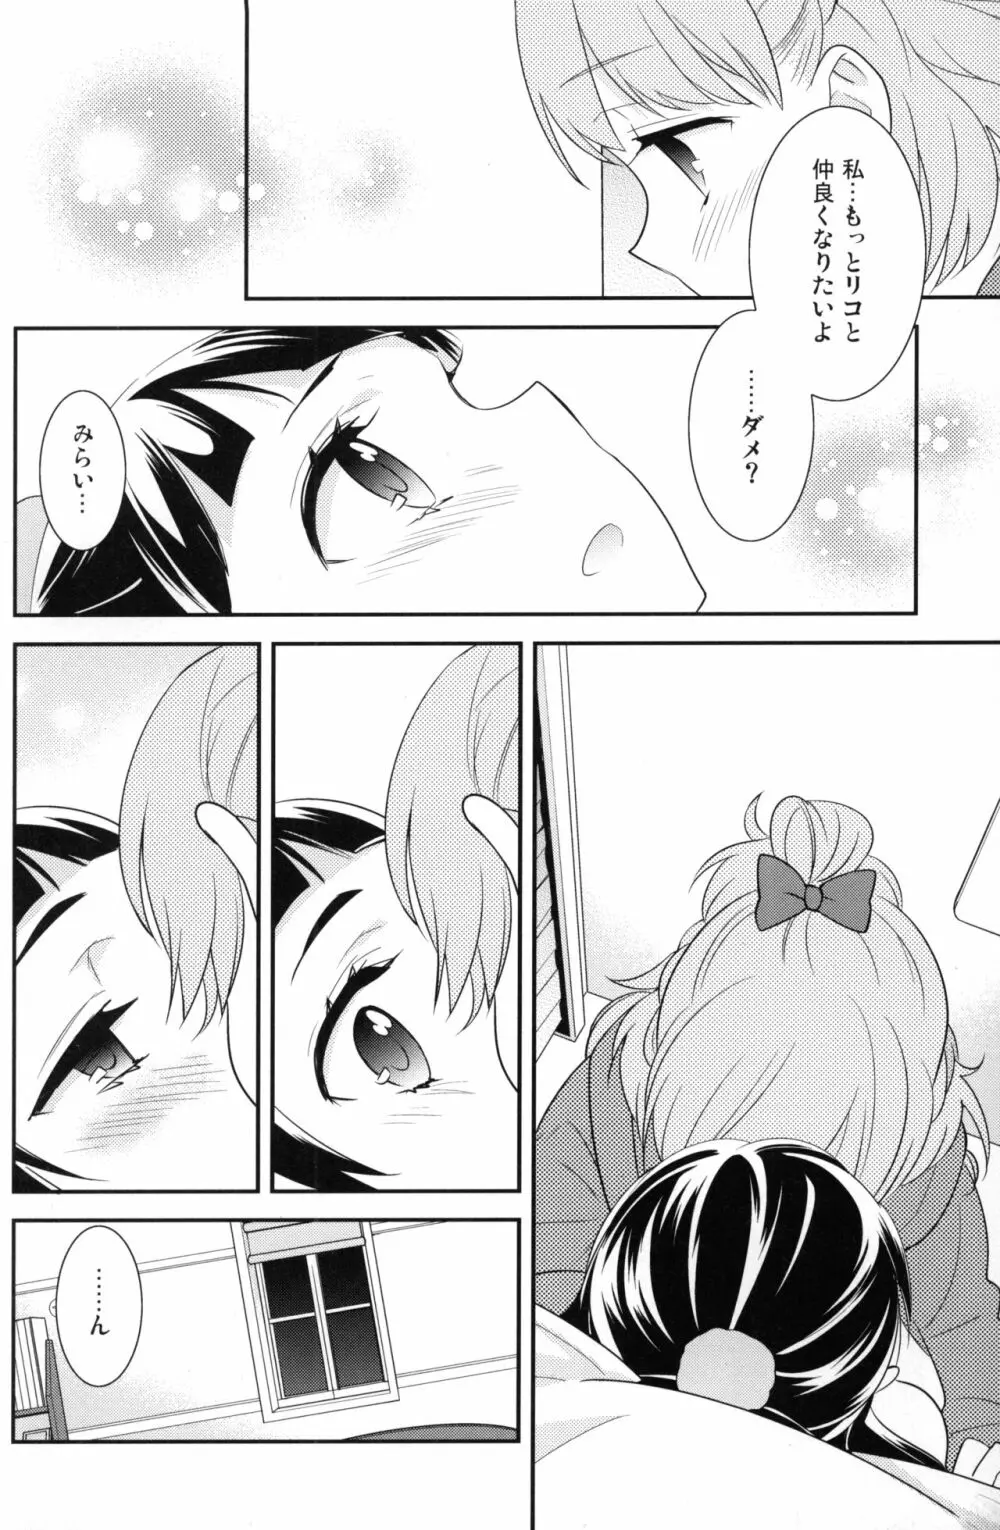 CURE UP↑↑ 秘密の宝島 - page13